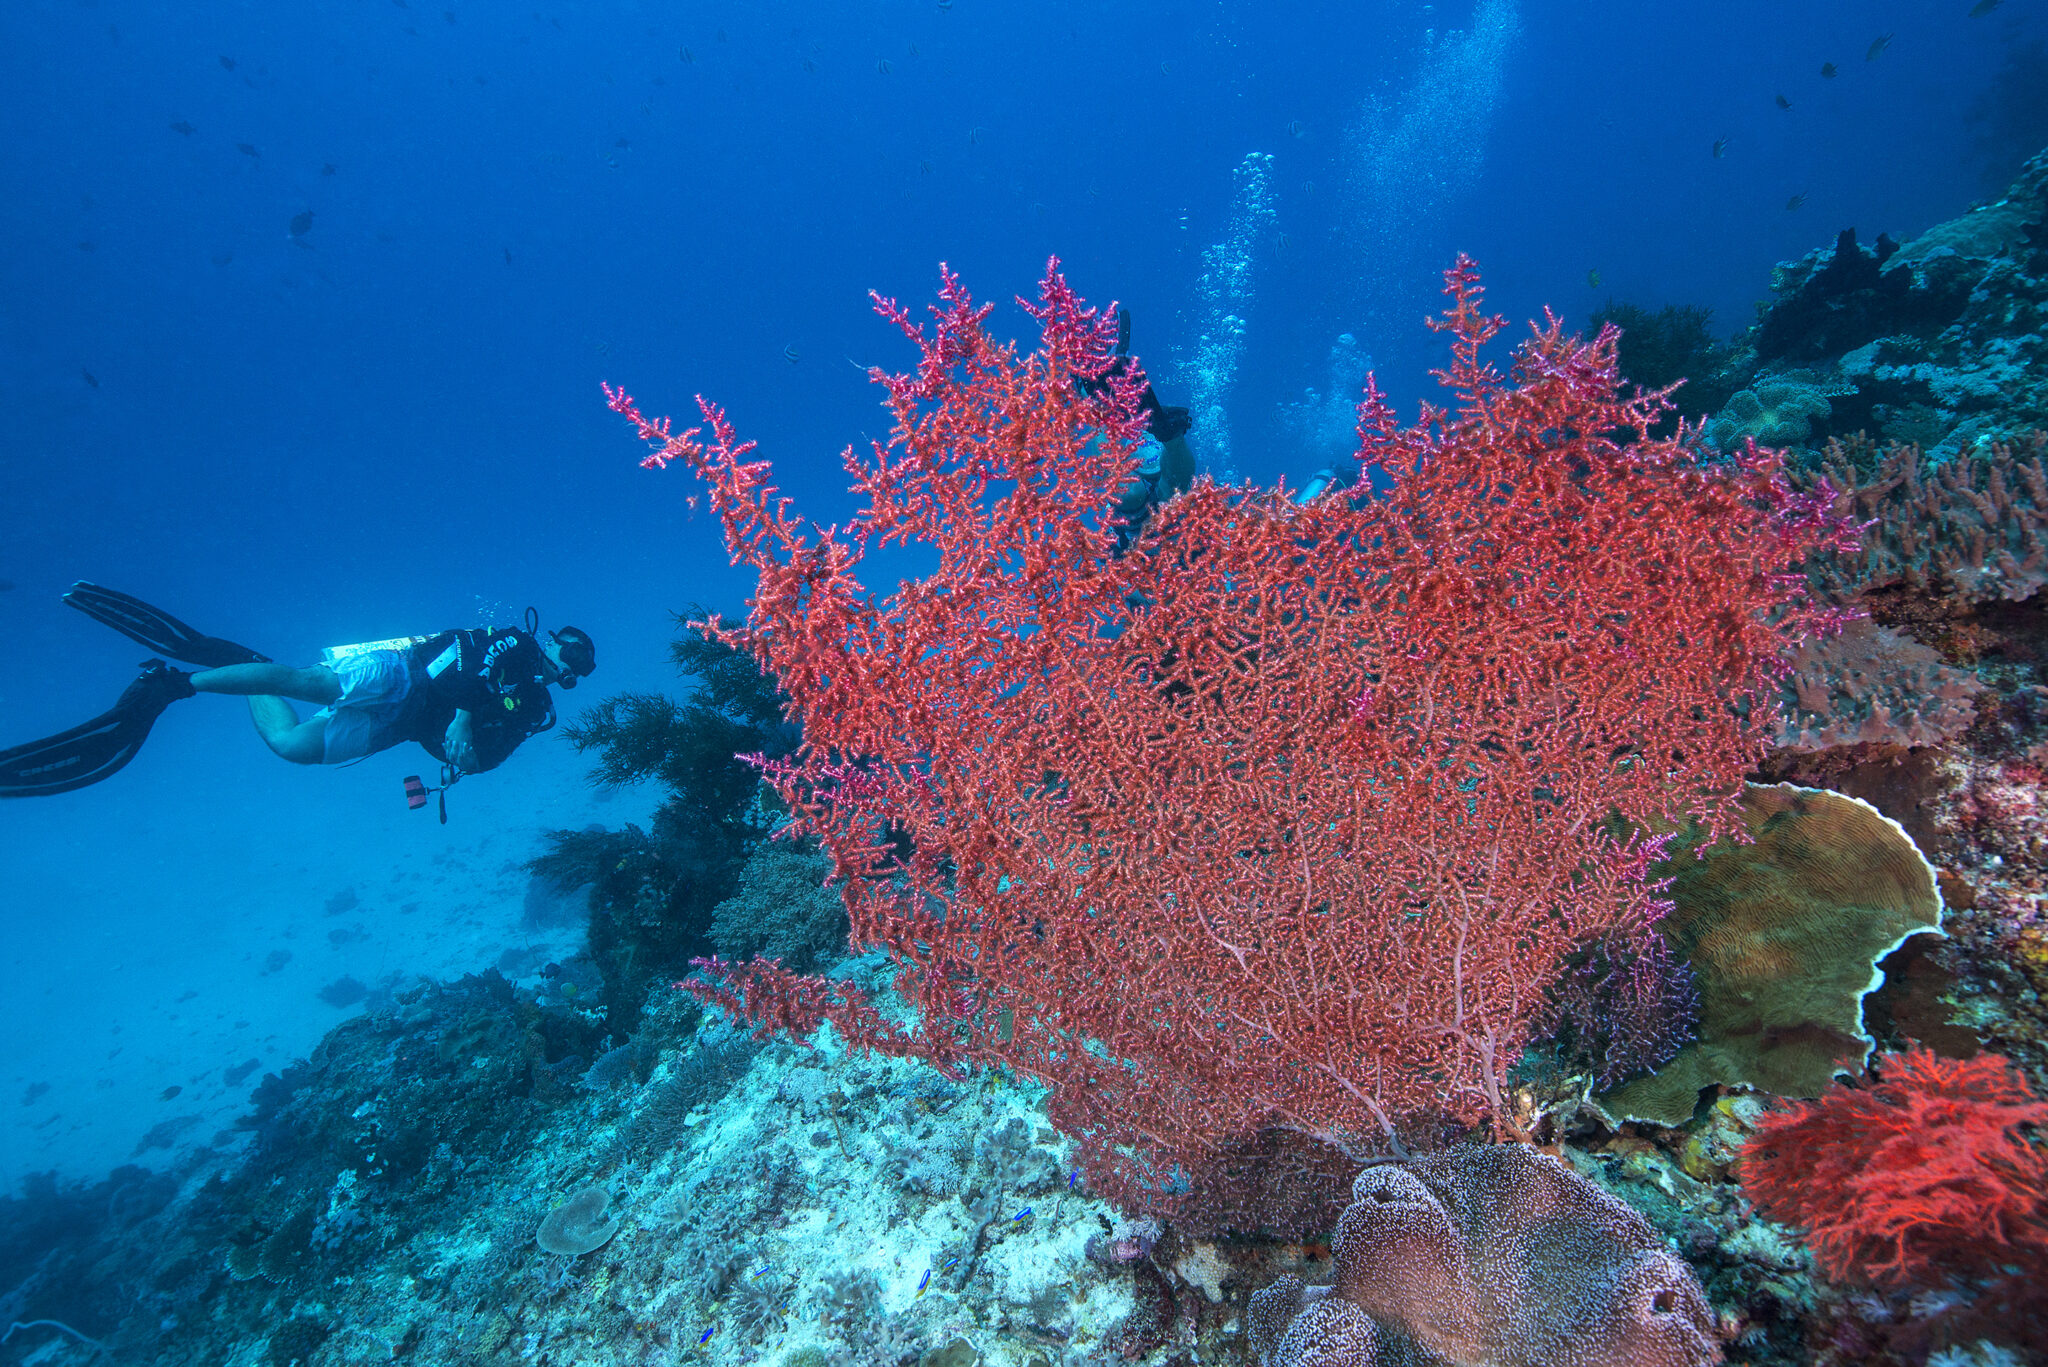 Divers swimming past a red gorgonian sea fan, one of many marine animals that are commonly mistaken for underwater plants